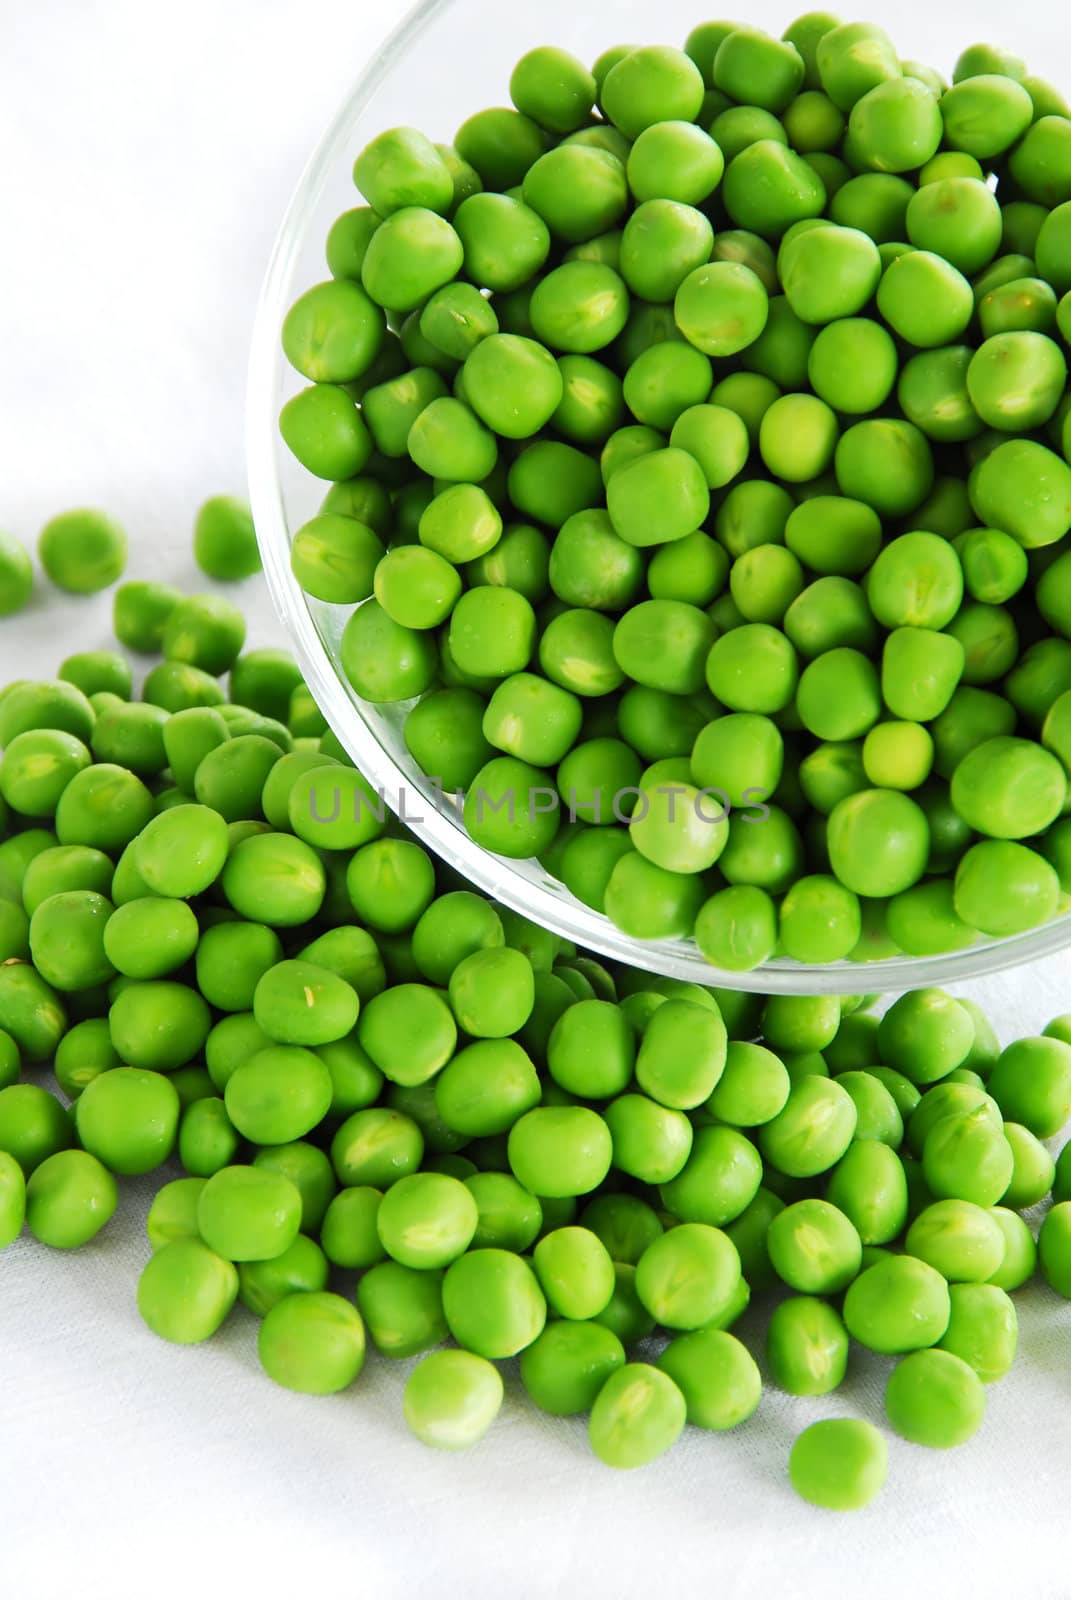 Young green peas by simply